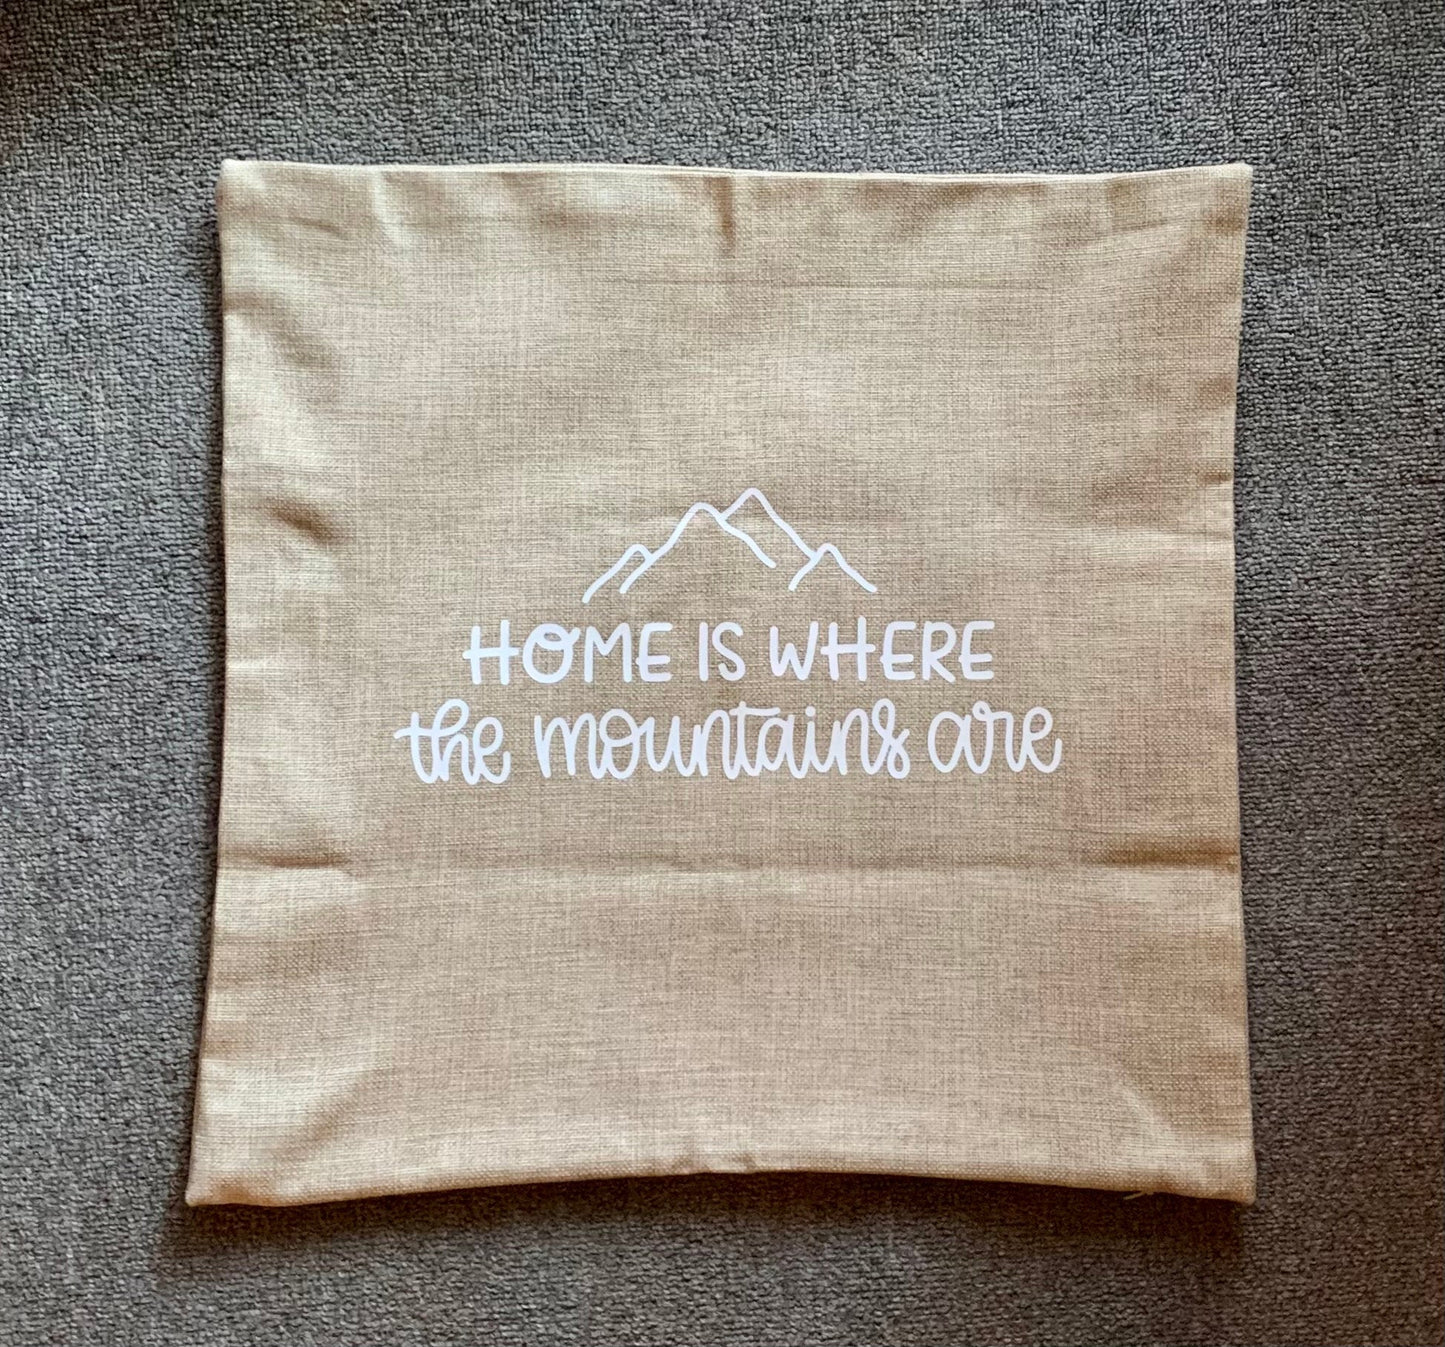 18x18" Home Is Where The Mountains Are Pillow Cover